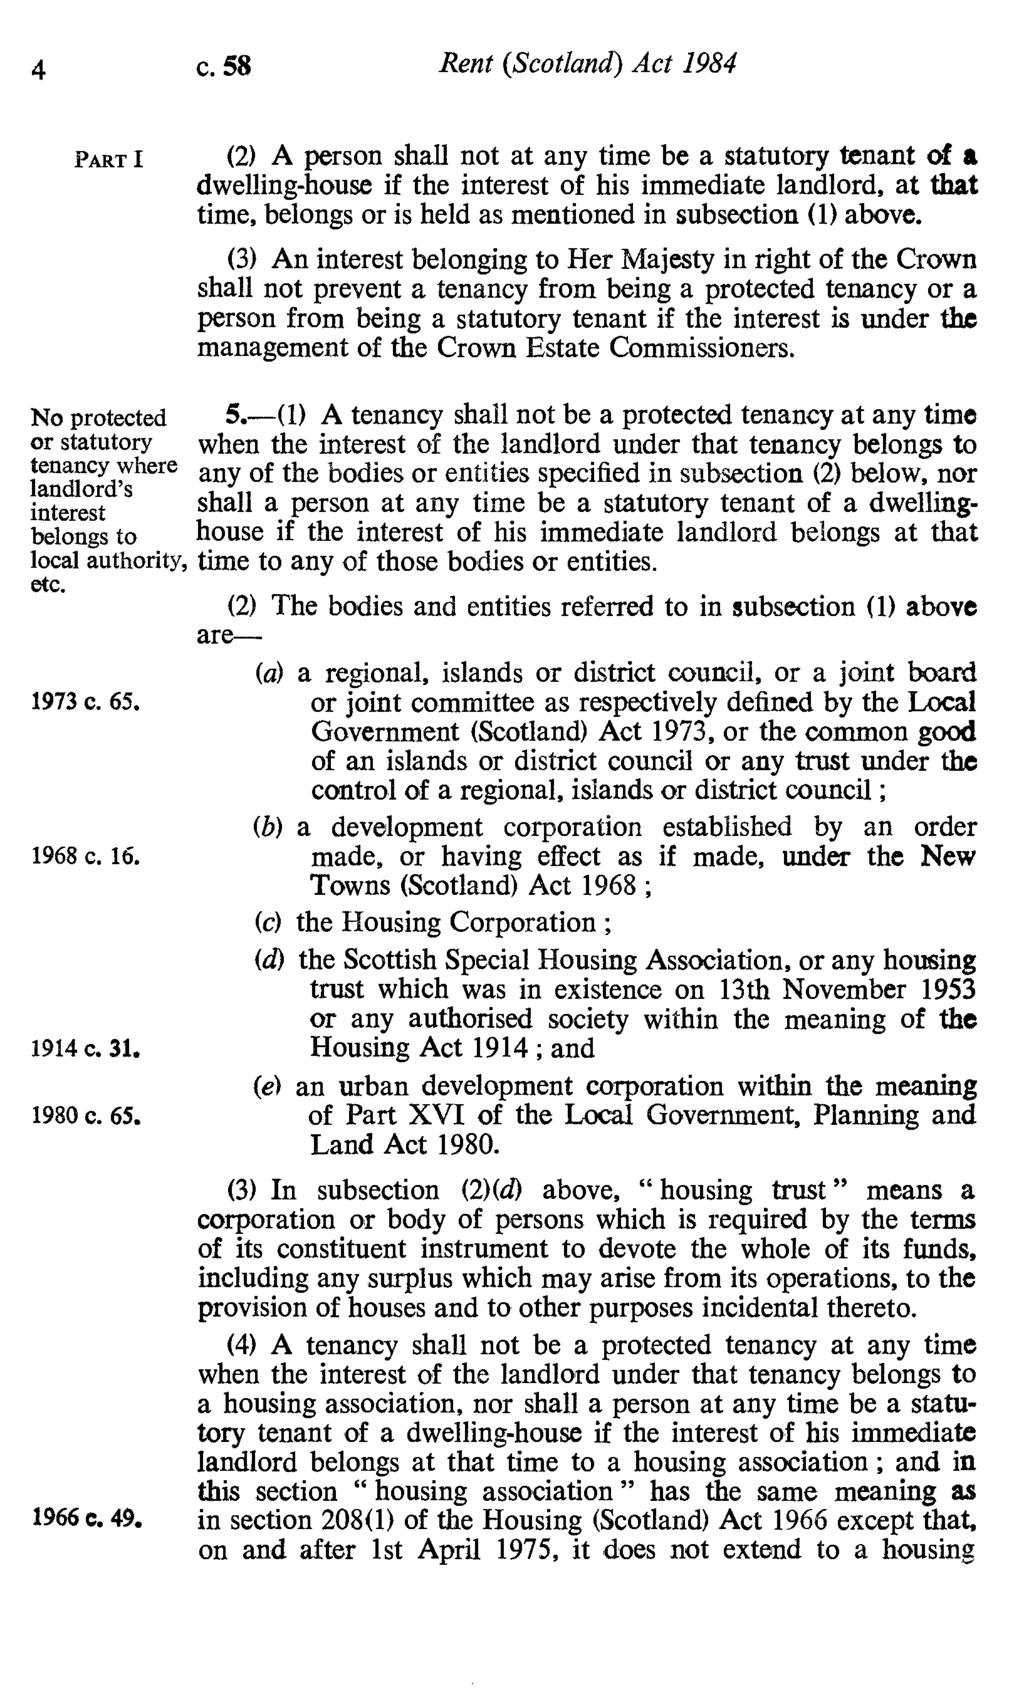 4 c. 58 Rent (Scotland) Act 1984 PART 1 (2) A person shall not at any time be a statutory tenant of a dwelling-house if the interest of his immediate landlord, at that time, belongs or is held as